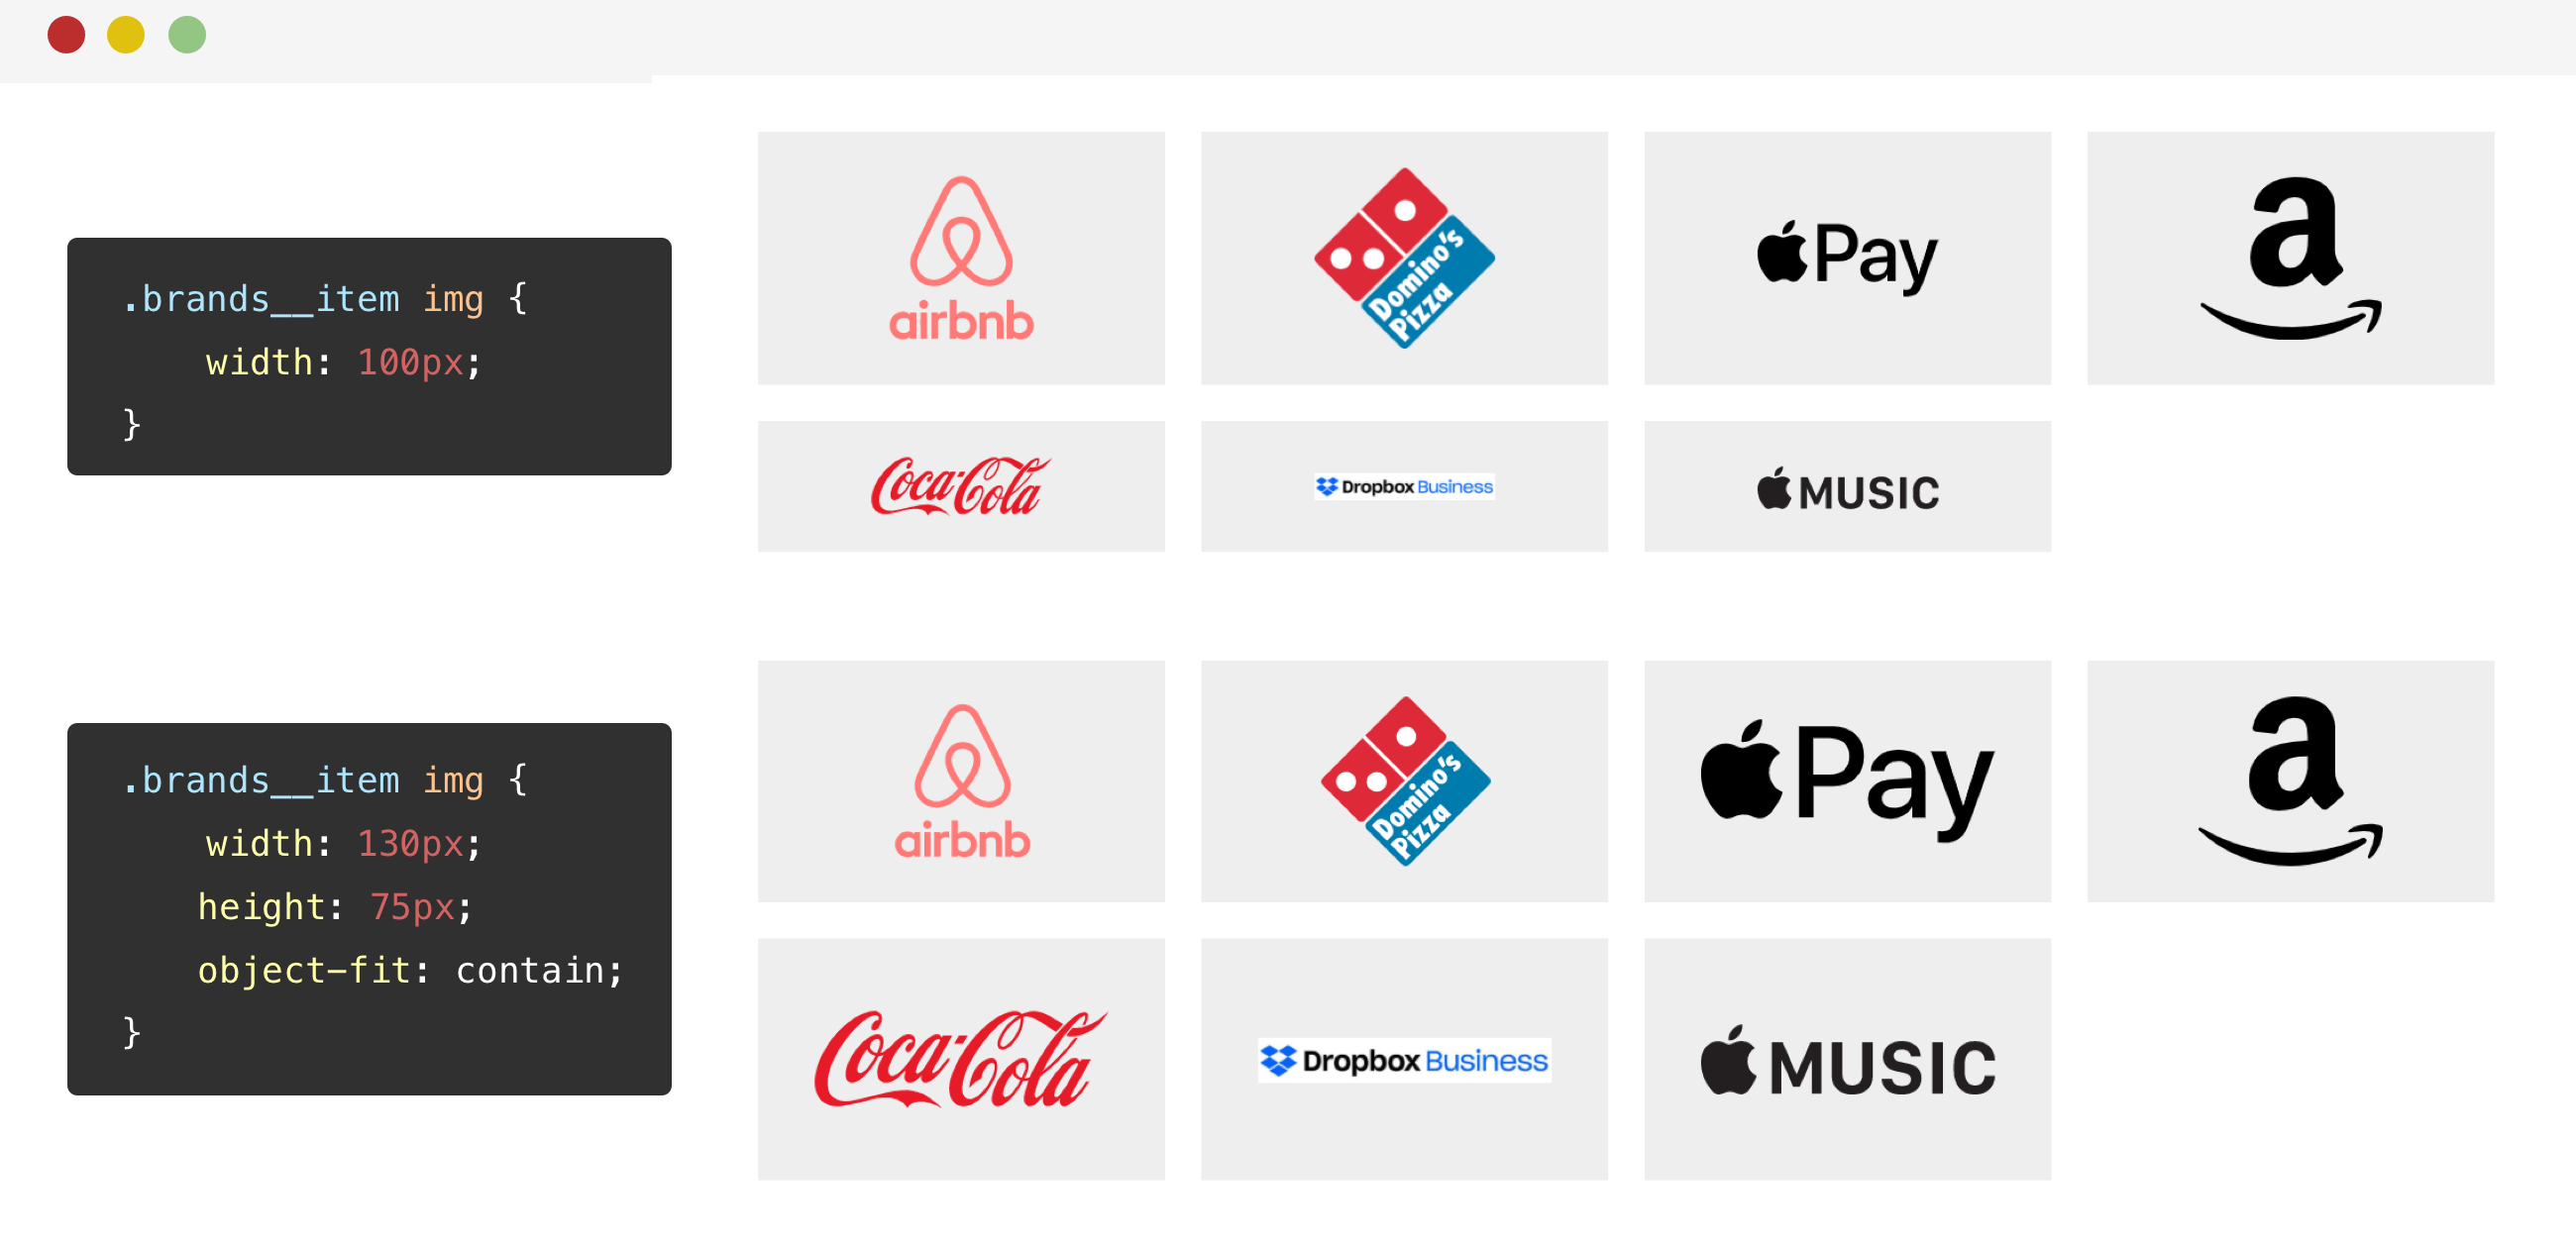 Two grids of logos. One uses object-fit:contain and looks much better!